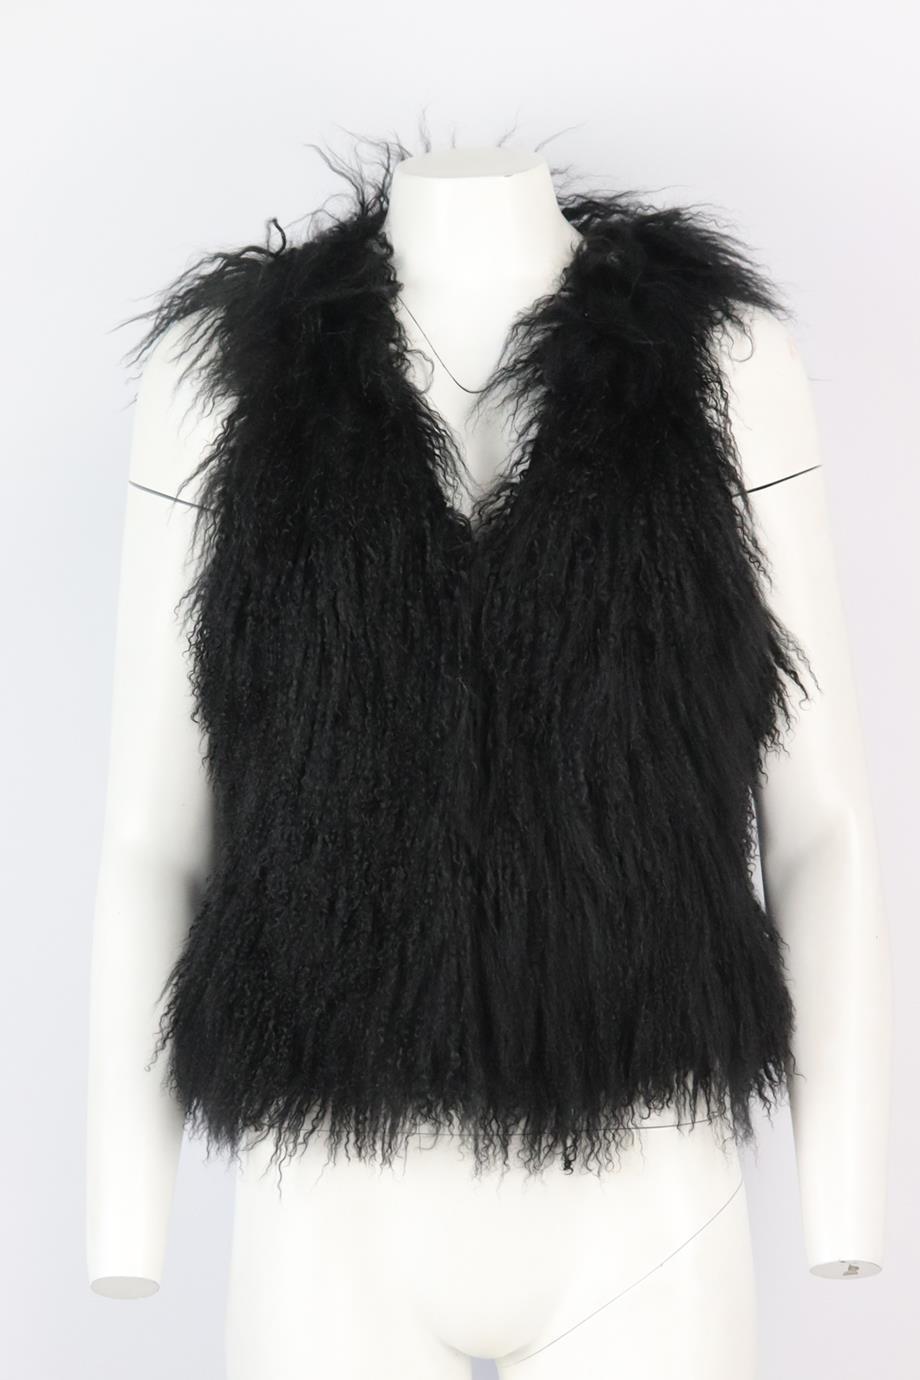 SNOW from St Barth shearling gilet. Black. Sleeveless, crewneck. 100% Lamb; lining: 100% viscose. Size: FR 36 (UK 8, US 4, IT 40). Bust: 32 in. Waist: 32 in. Hips: 36 in. Length: 22 in. Very good condition - No sign on wear; see pictures.
